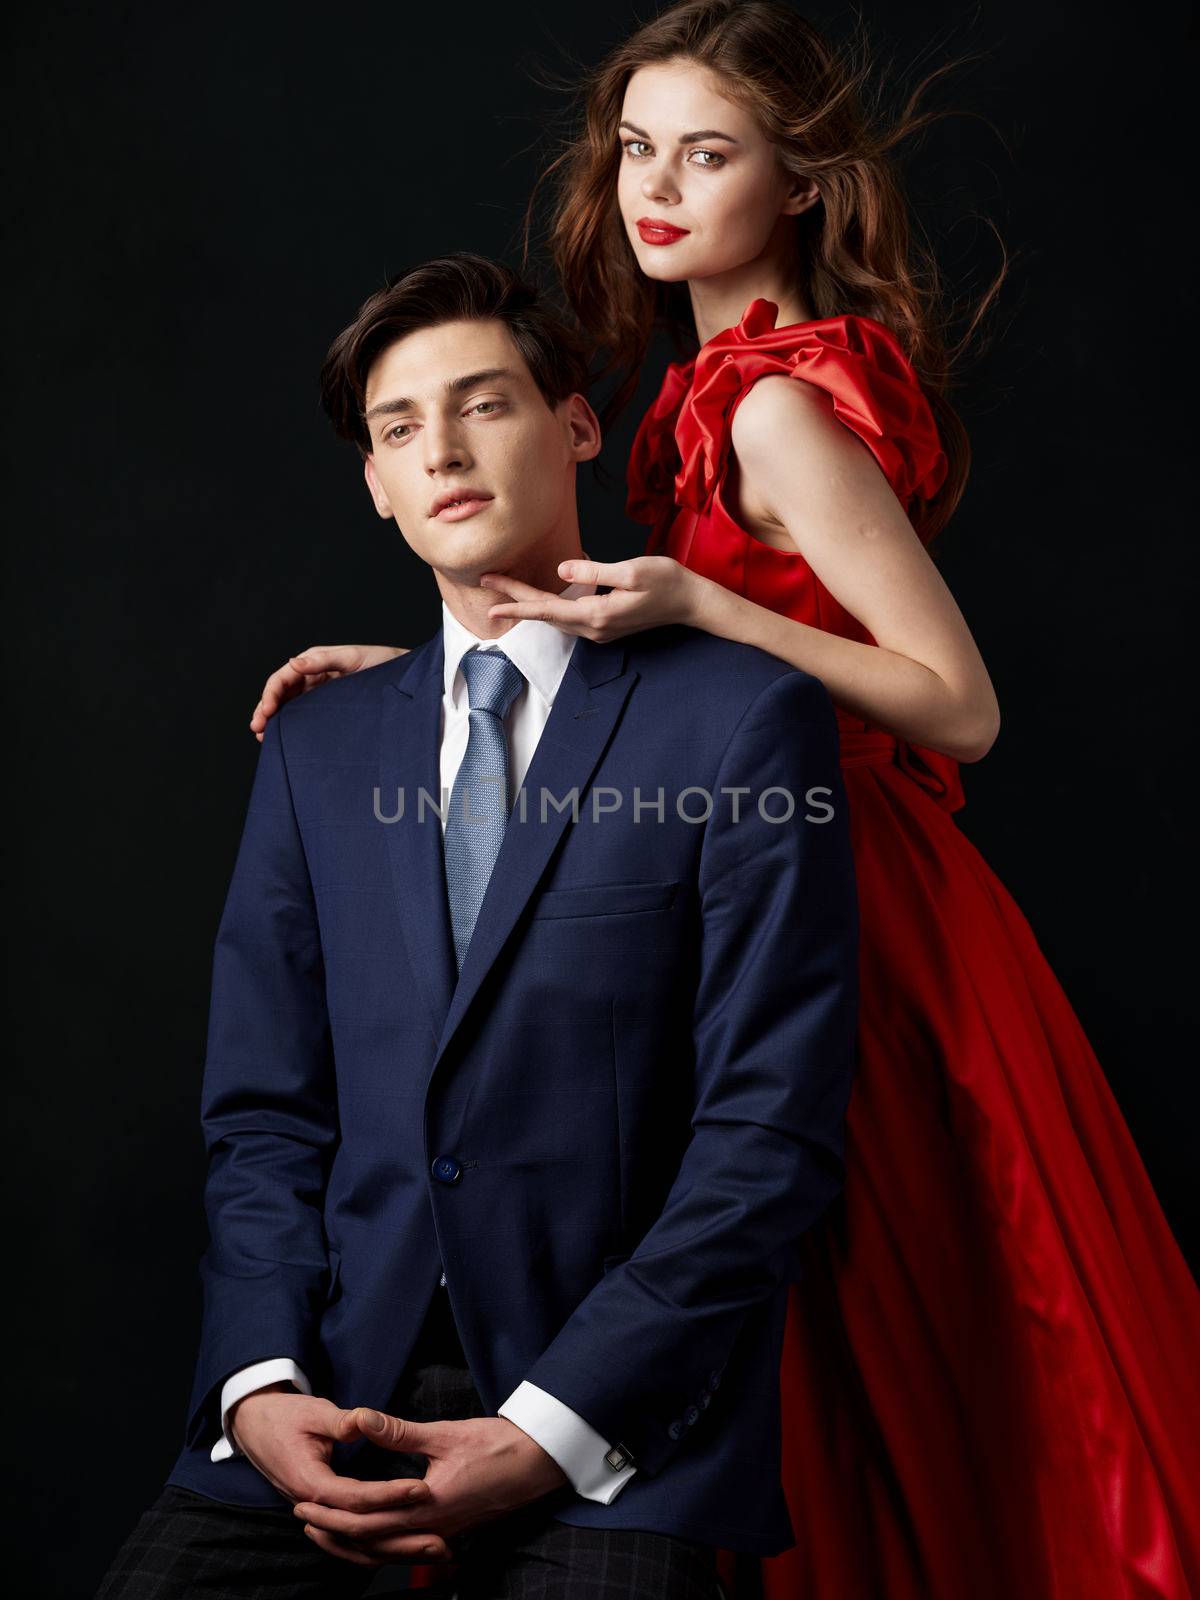 Charming couple man in suit woman in red dress relationship by SHOTPRIME